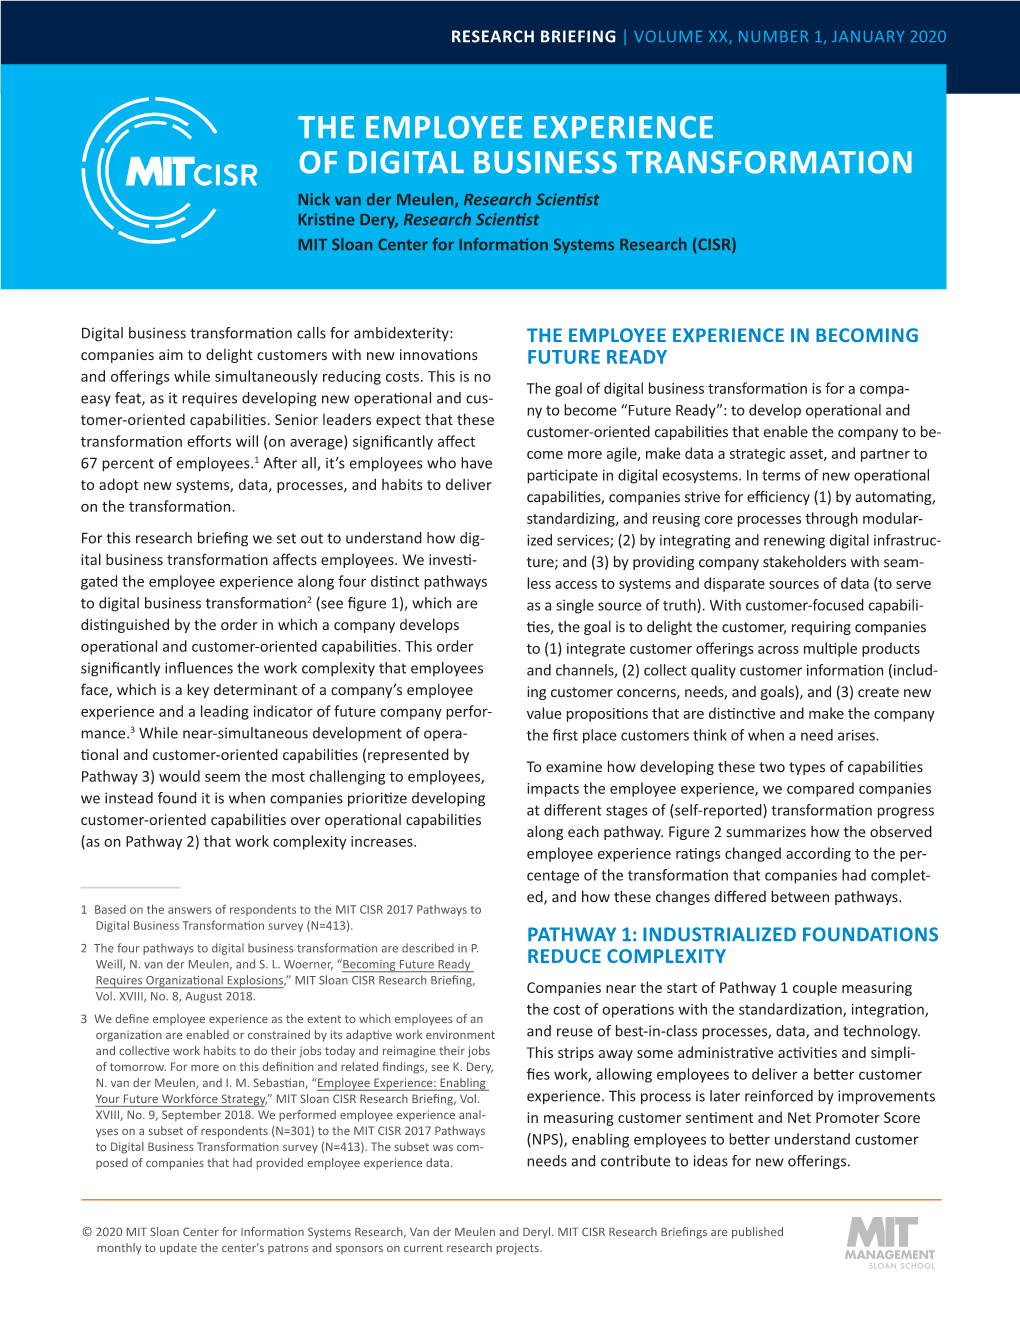 The Employee Experience of Digital Business Transformation